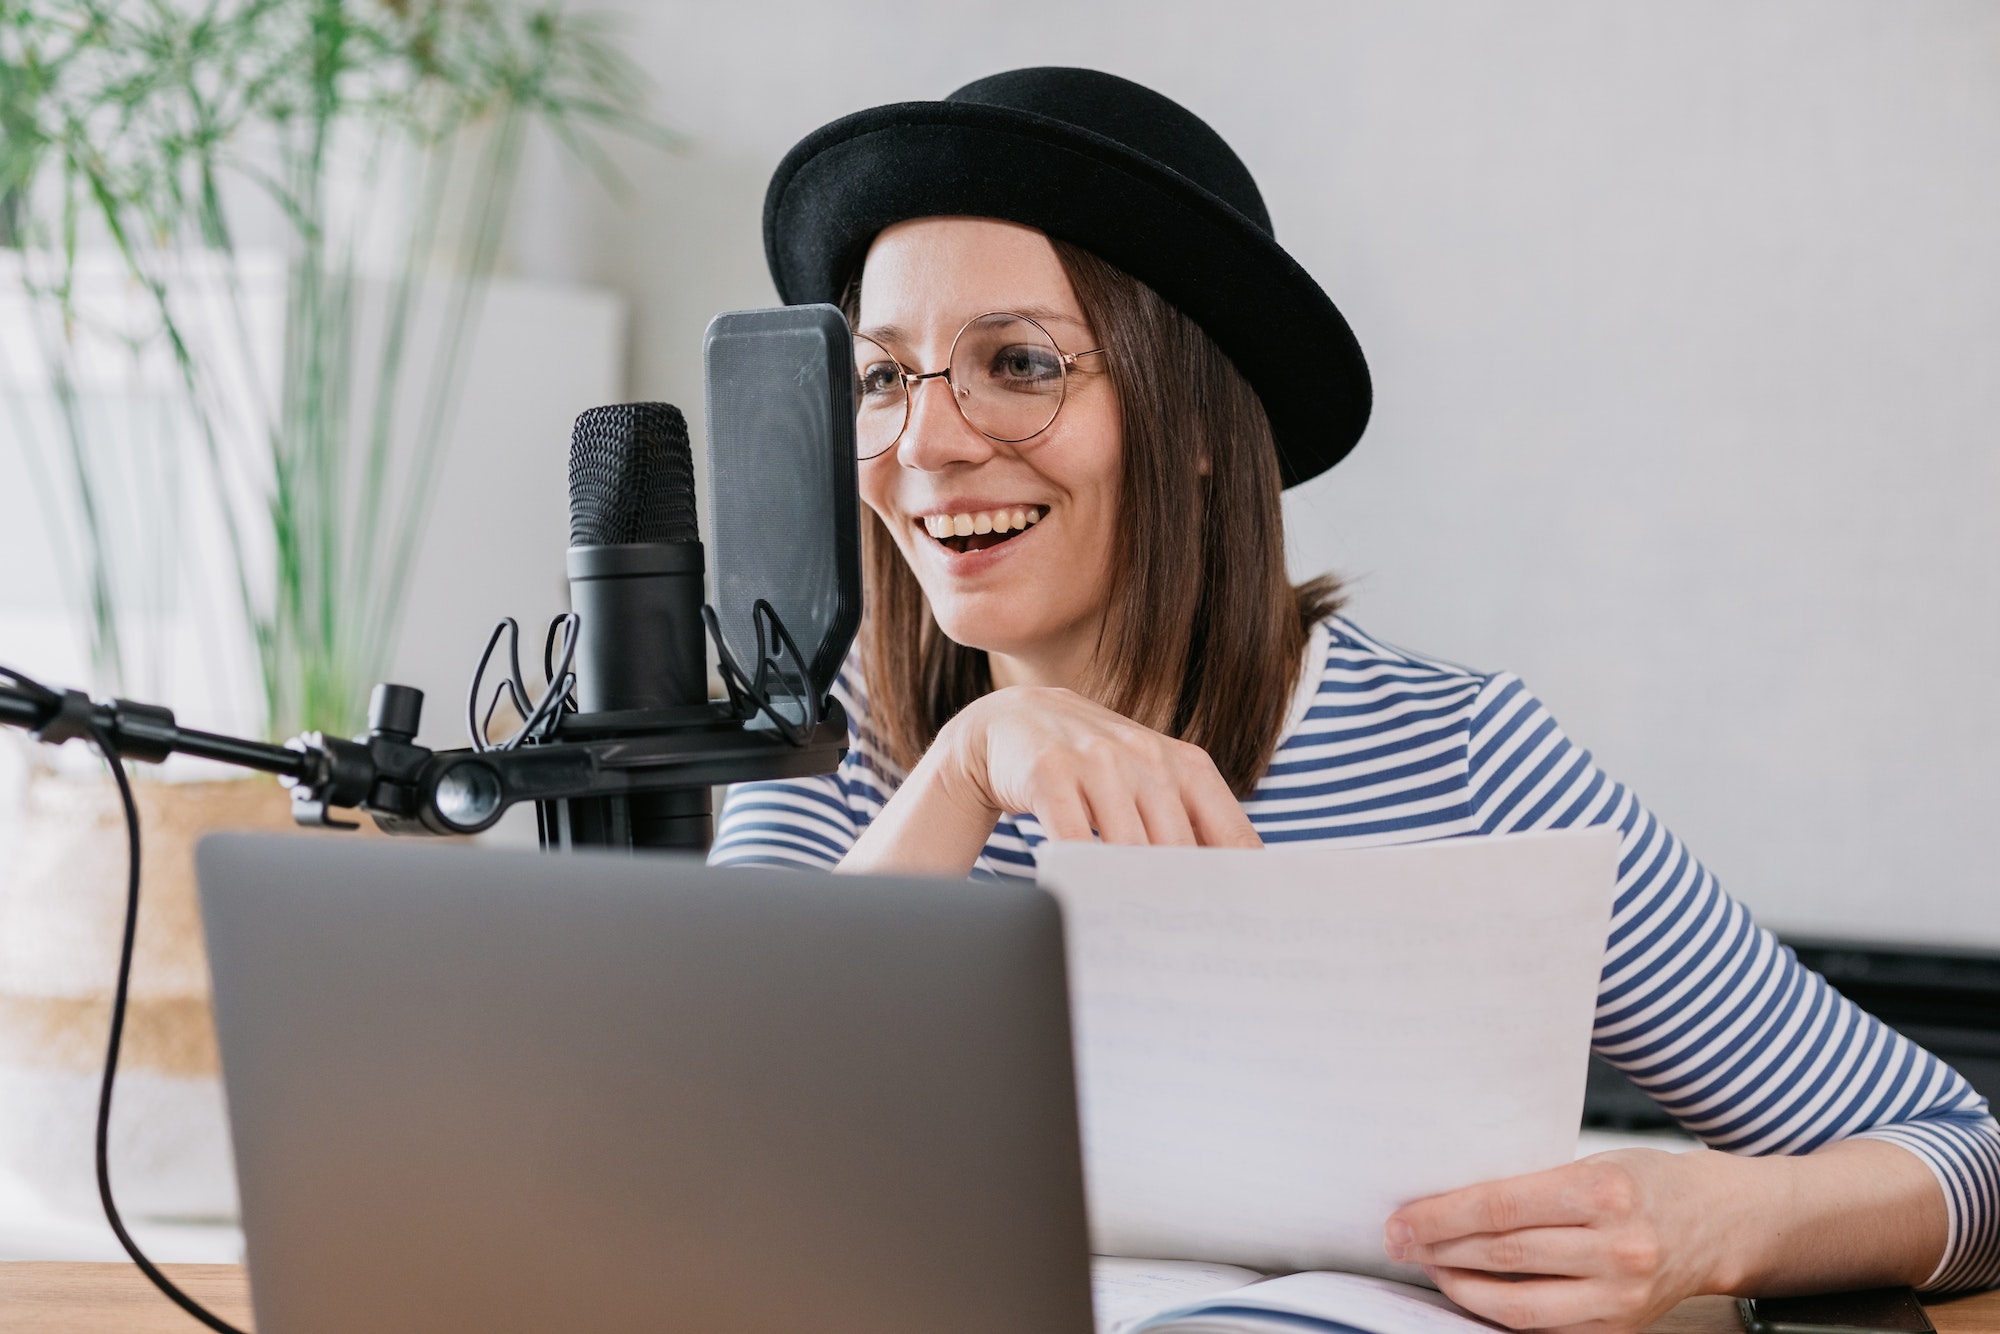 woman-with-microphone-and-headphones-in-recording-studio-recording-content-or-podcast.jpg